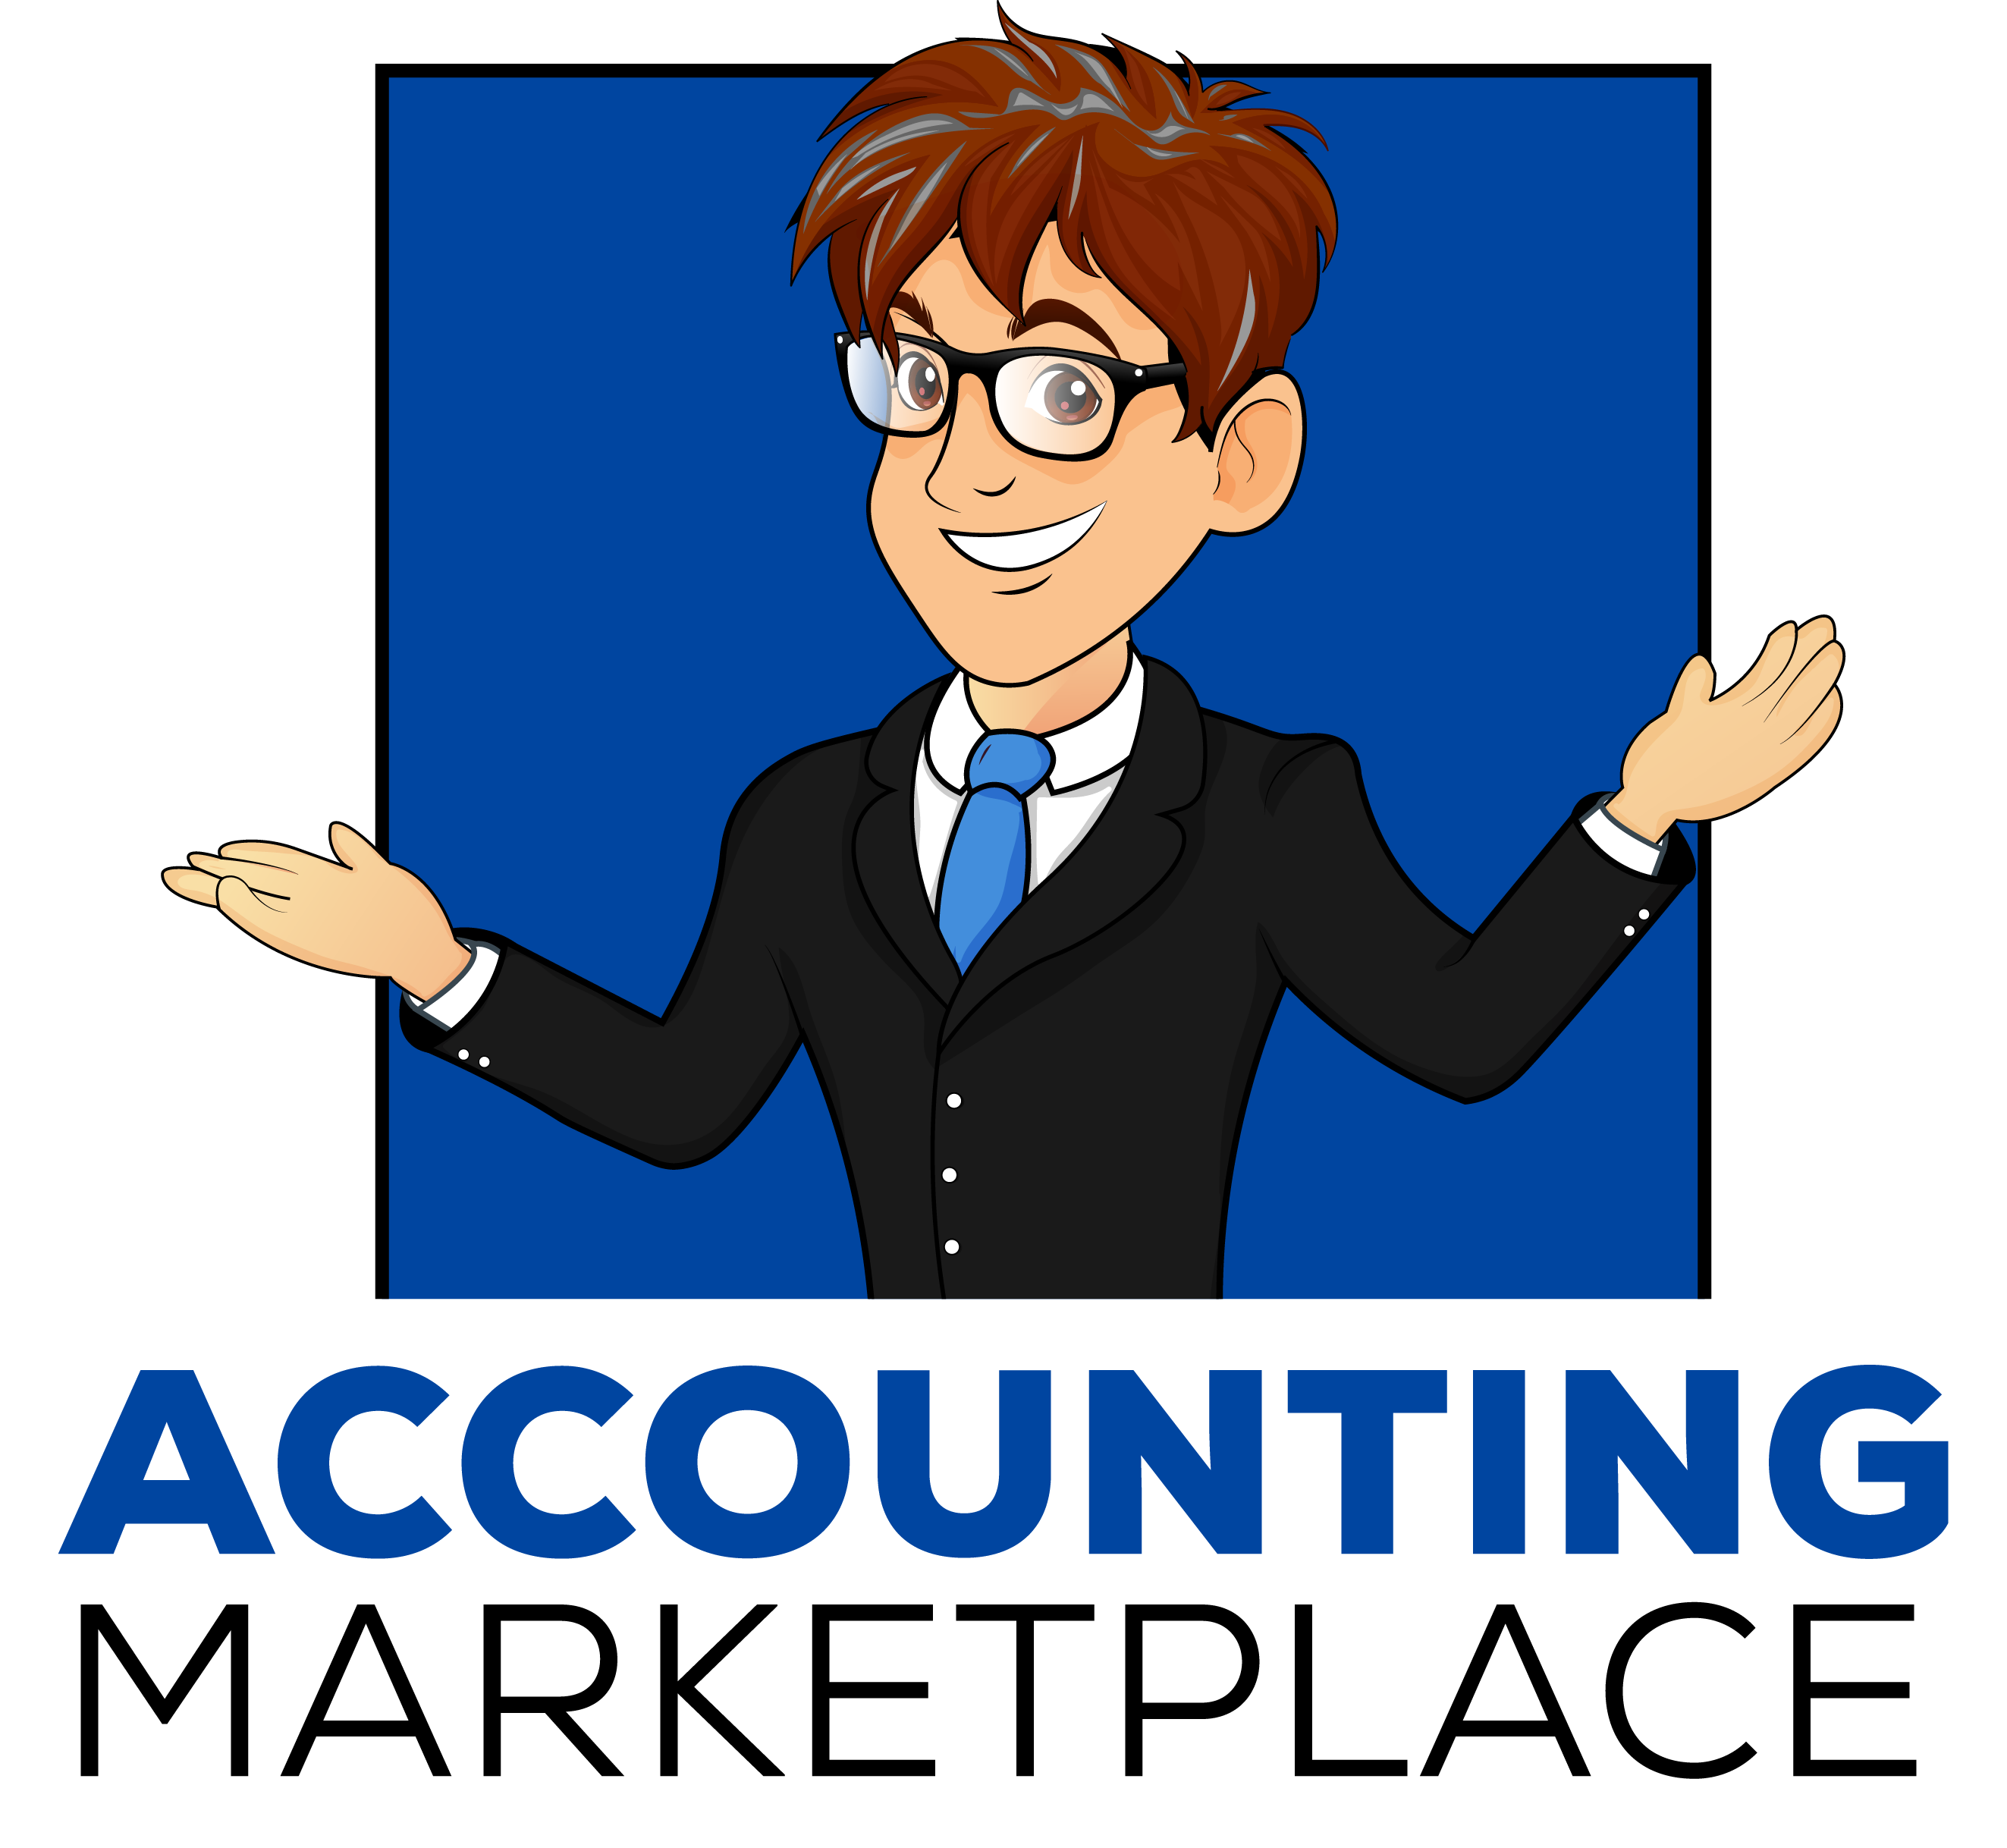 Accounting Marketplace